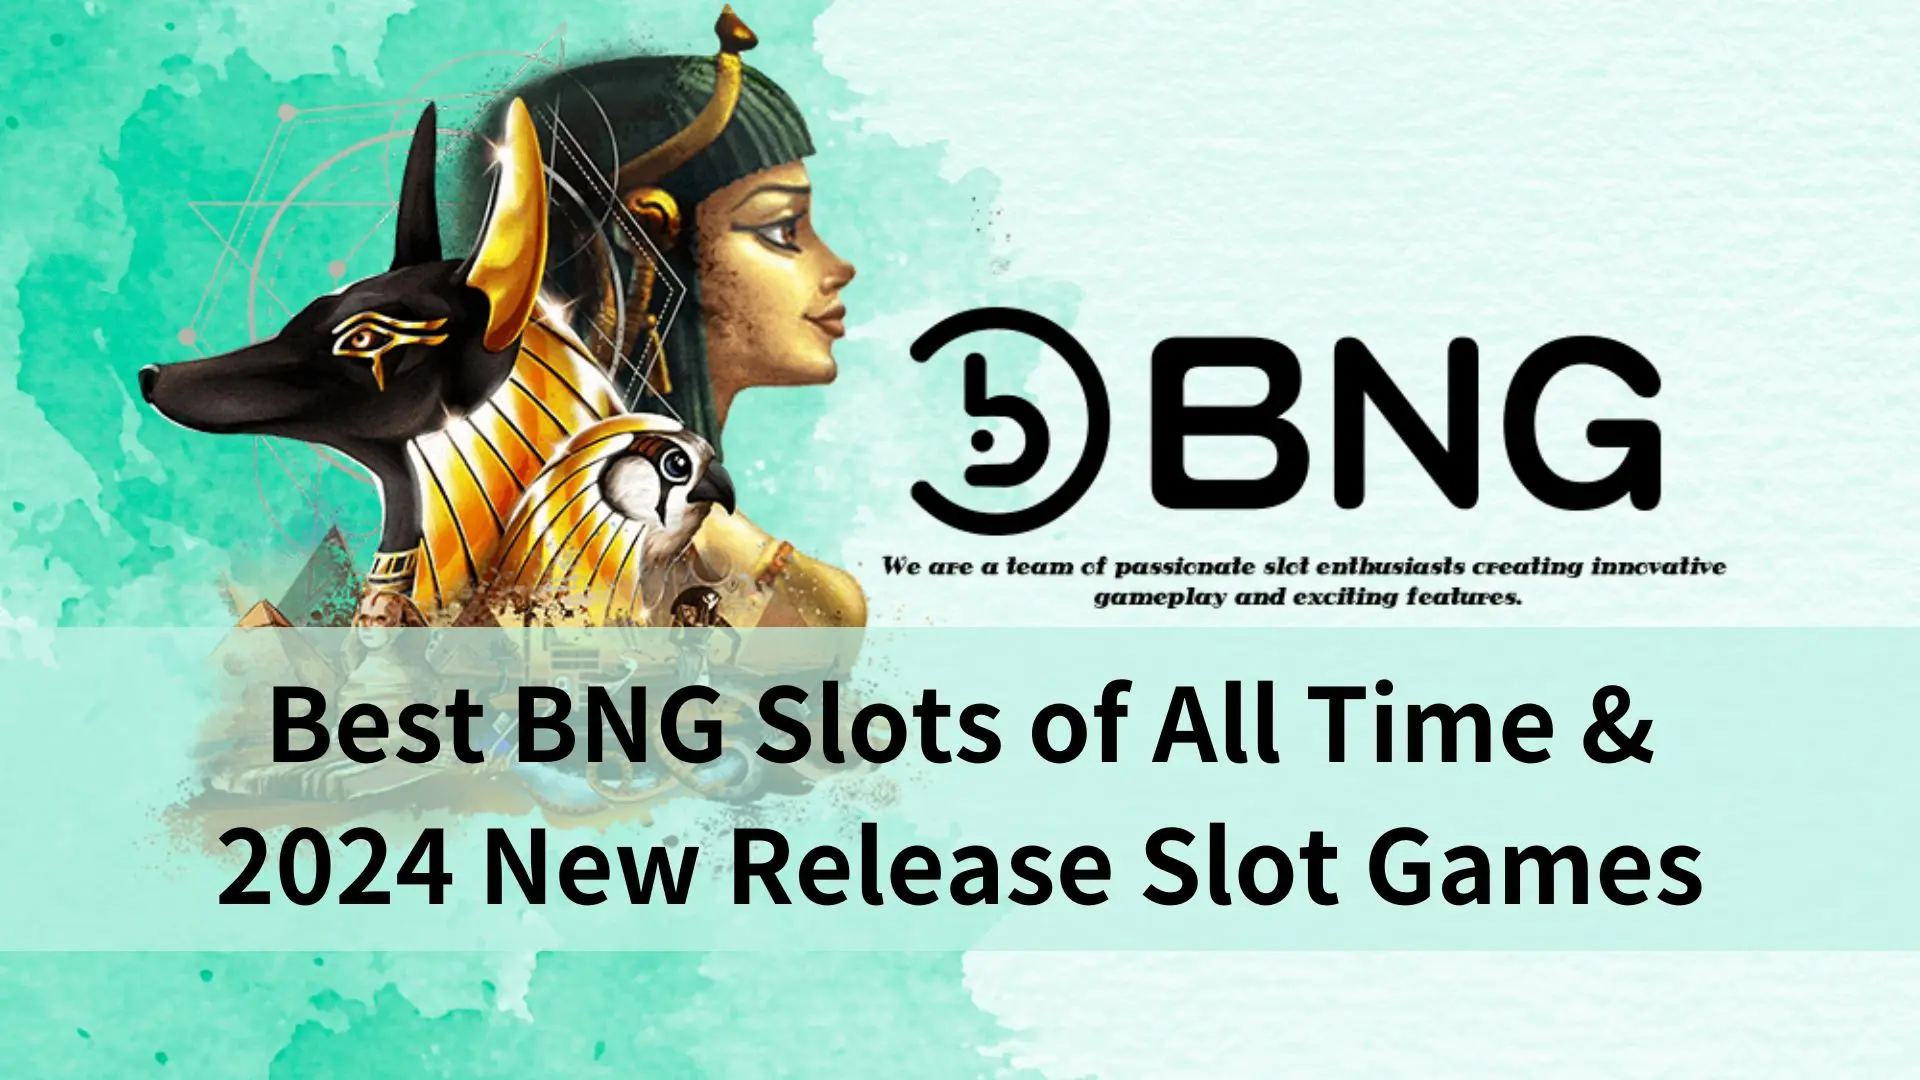 Best BNG Slots